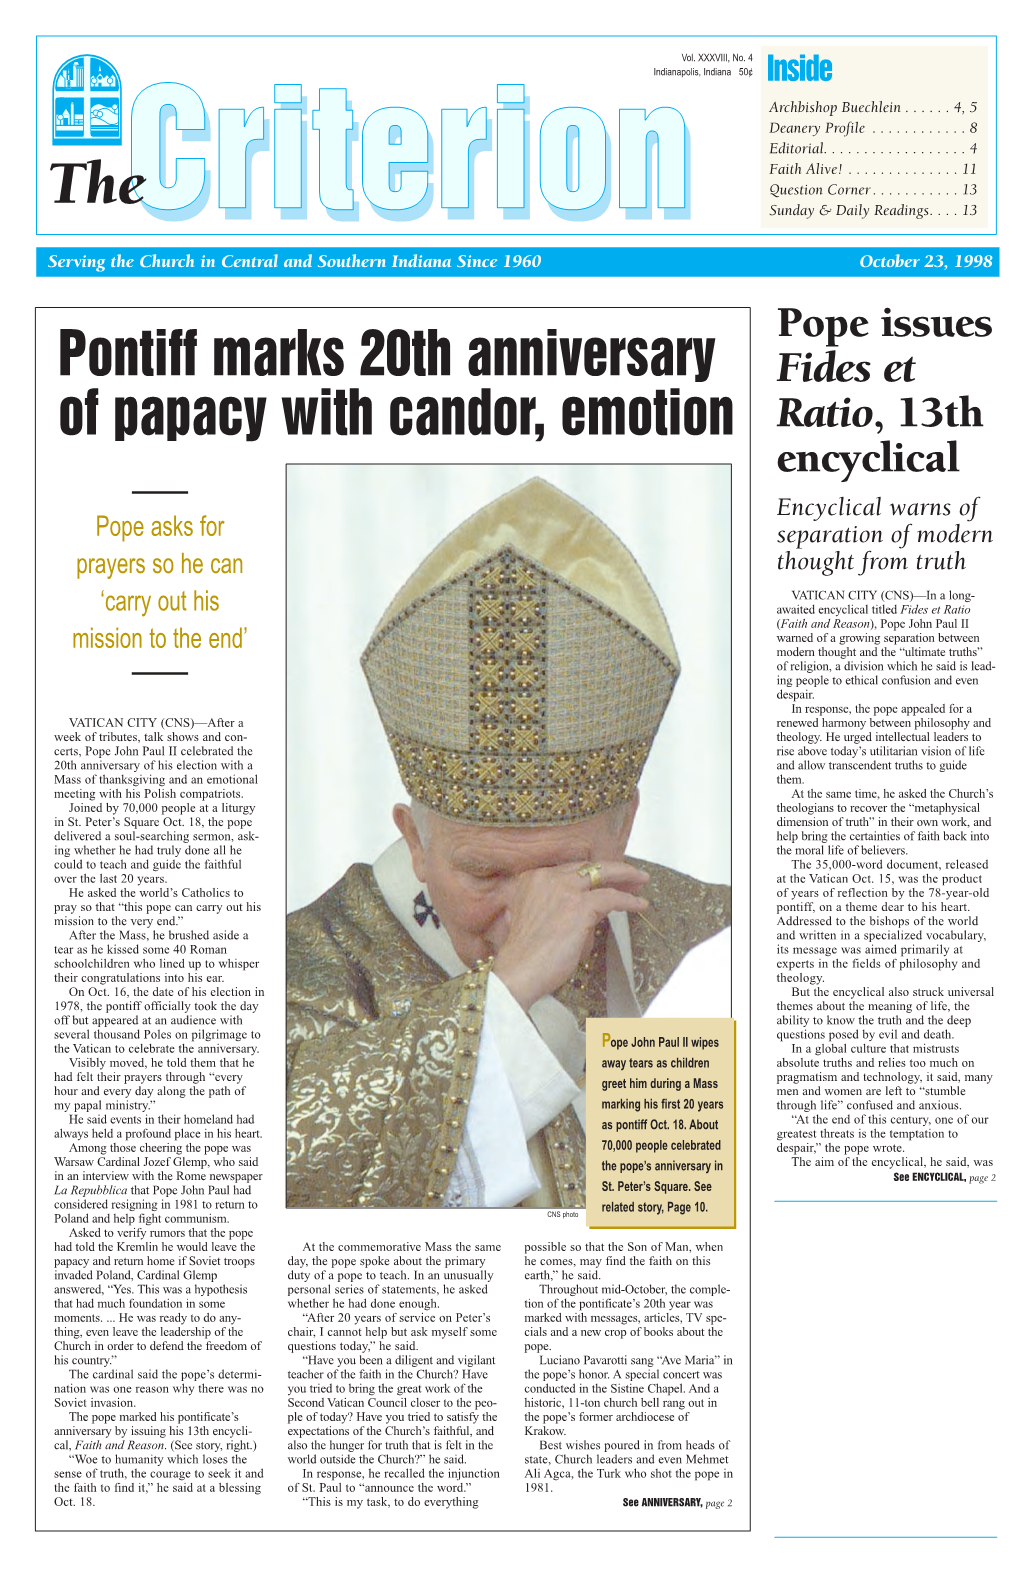 Pontiff Marks 20Th Anniversary of Papacy with Candor, Emotion